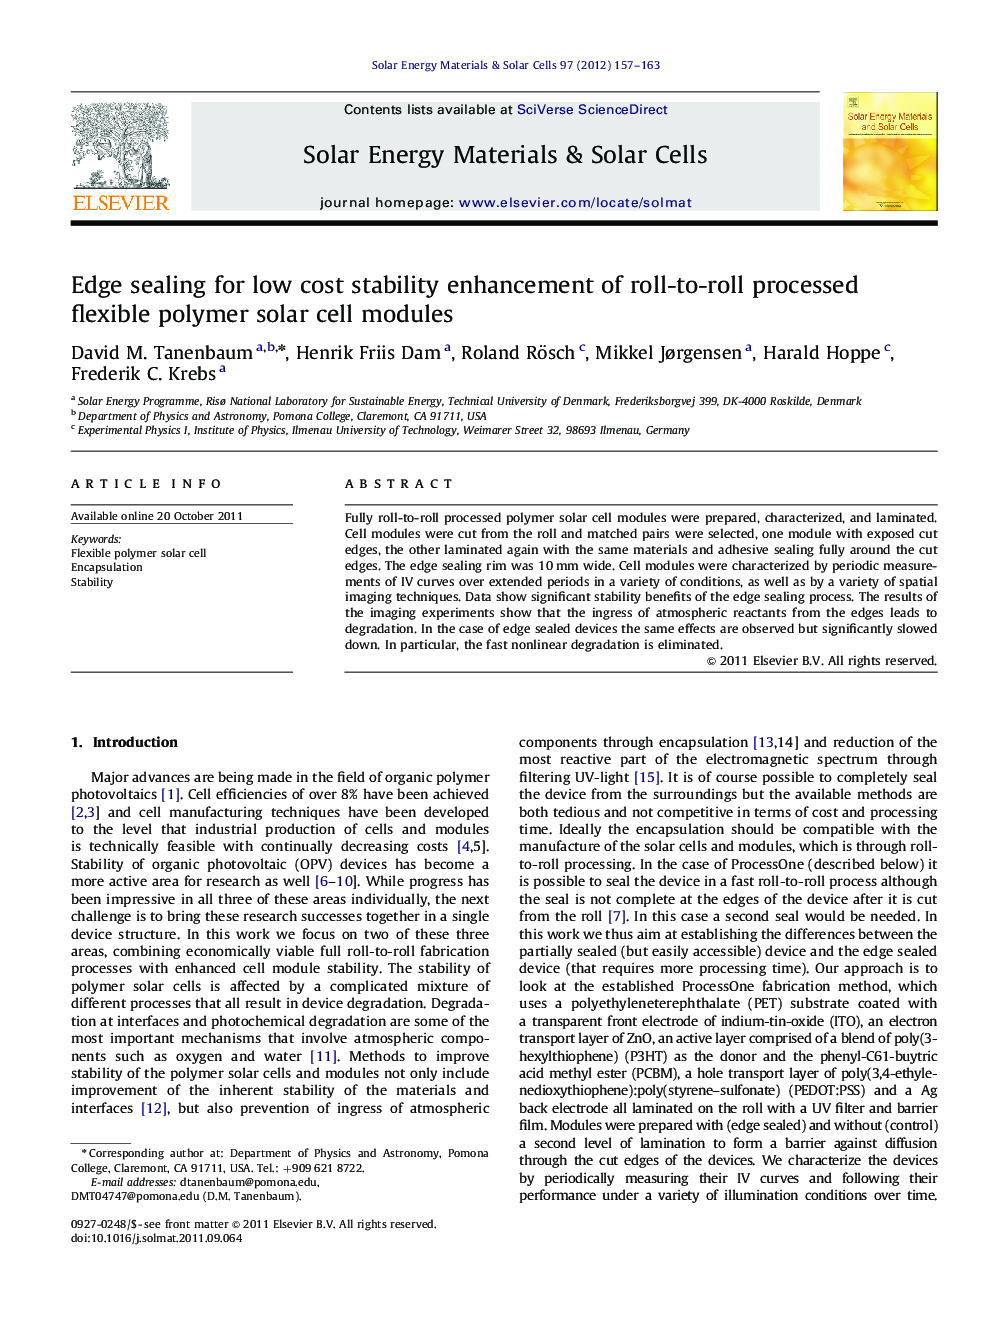 Edge sealing for low cost stability enhancement of roll-to-roll processed flexible polymer solar cell modules